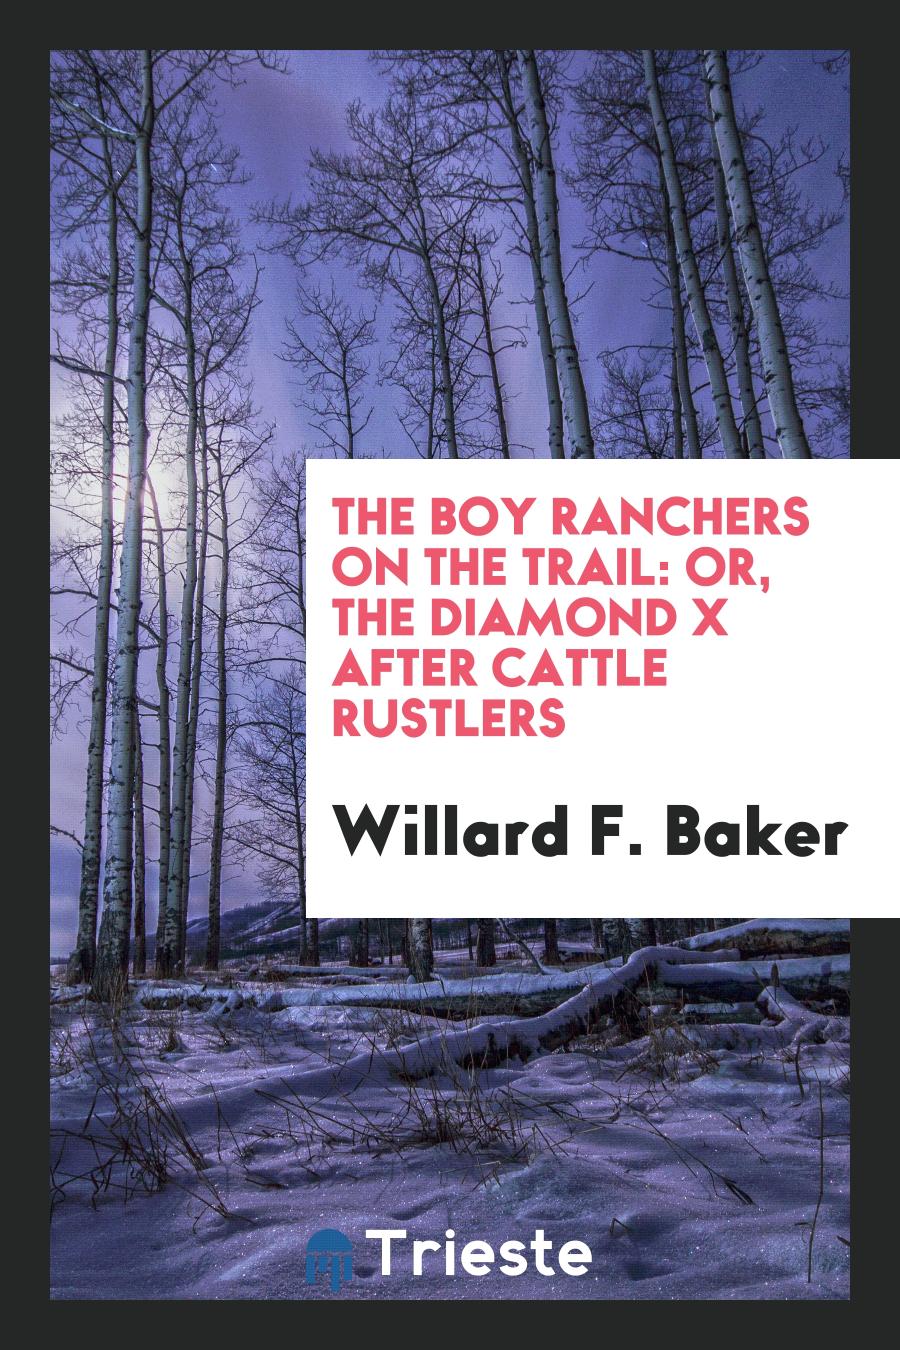 The Boy Ranchers on the Trail: Or, the Diamond X After Cattle Rustlers